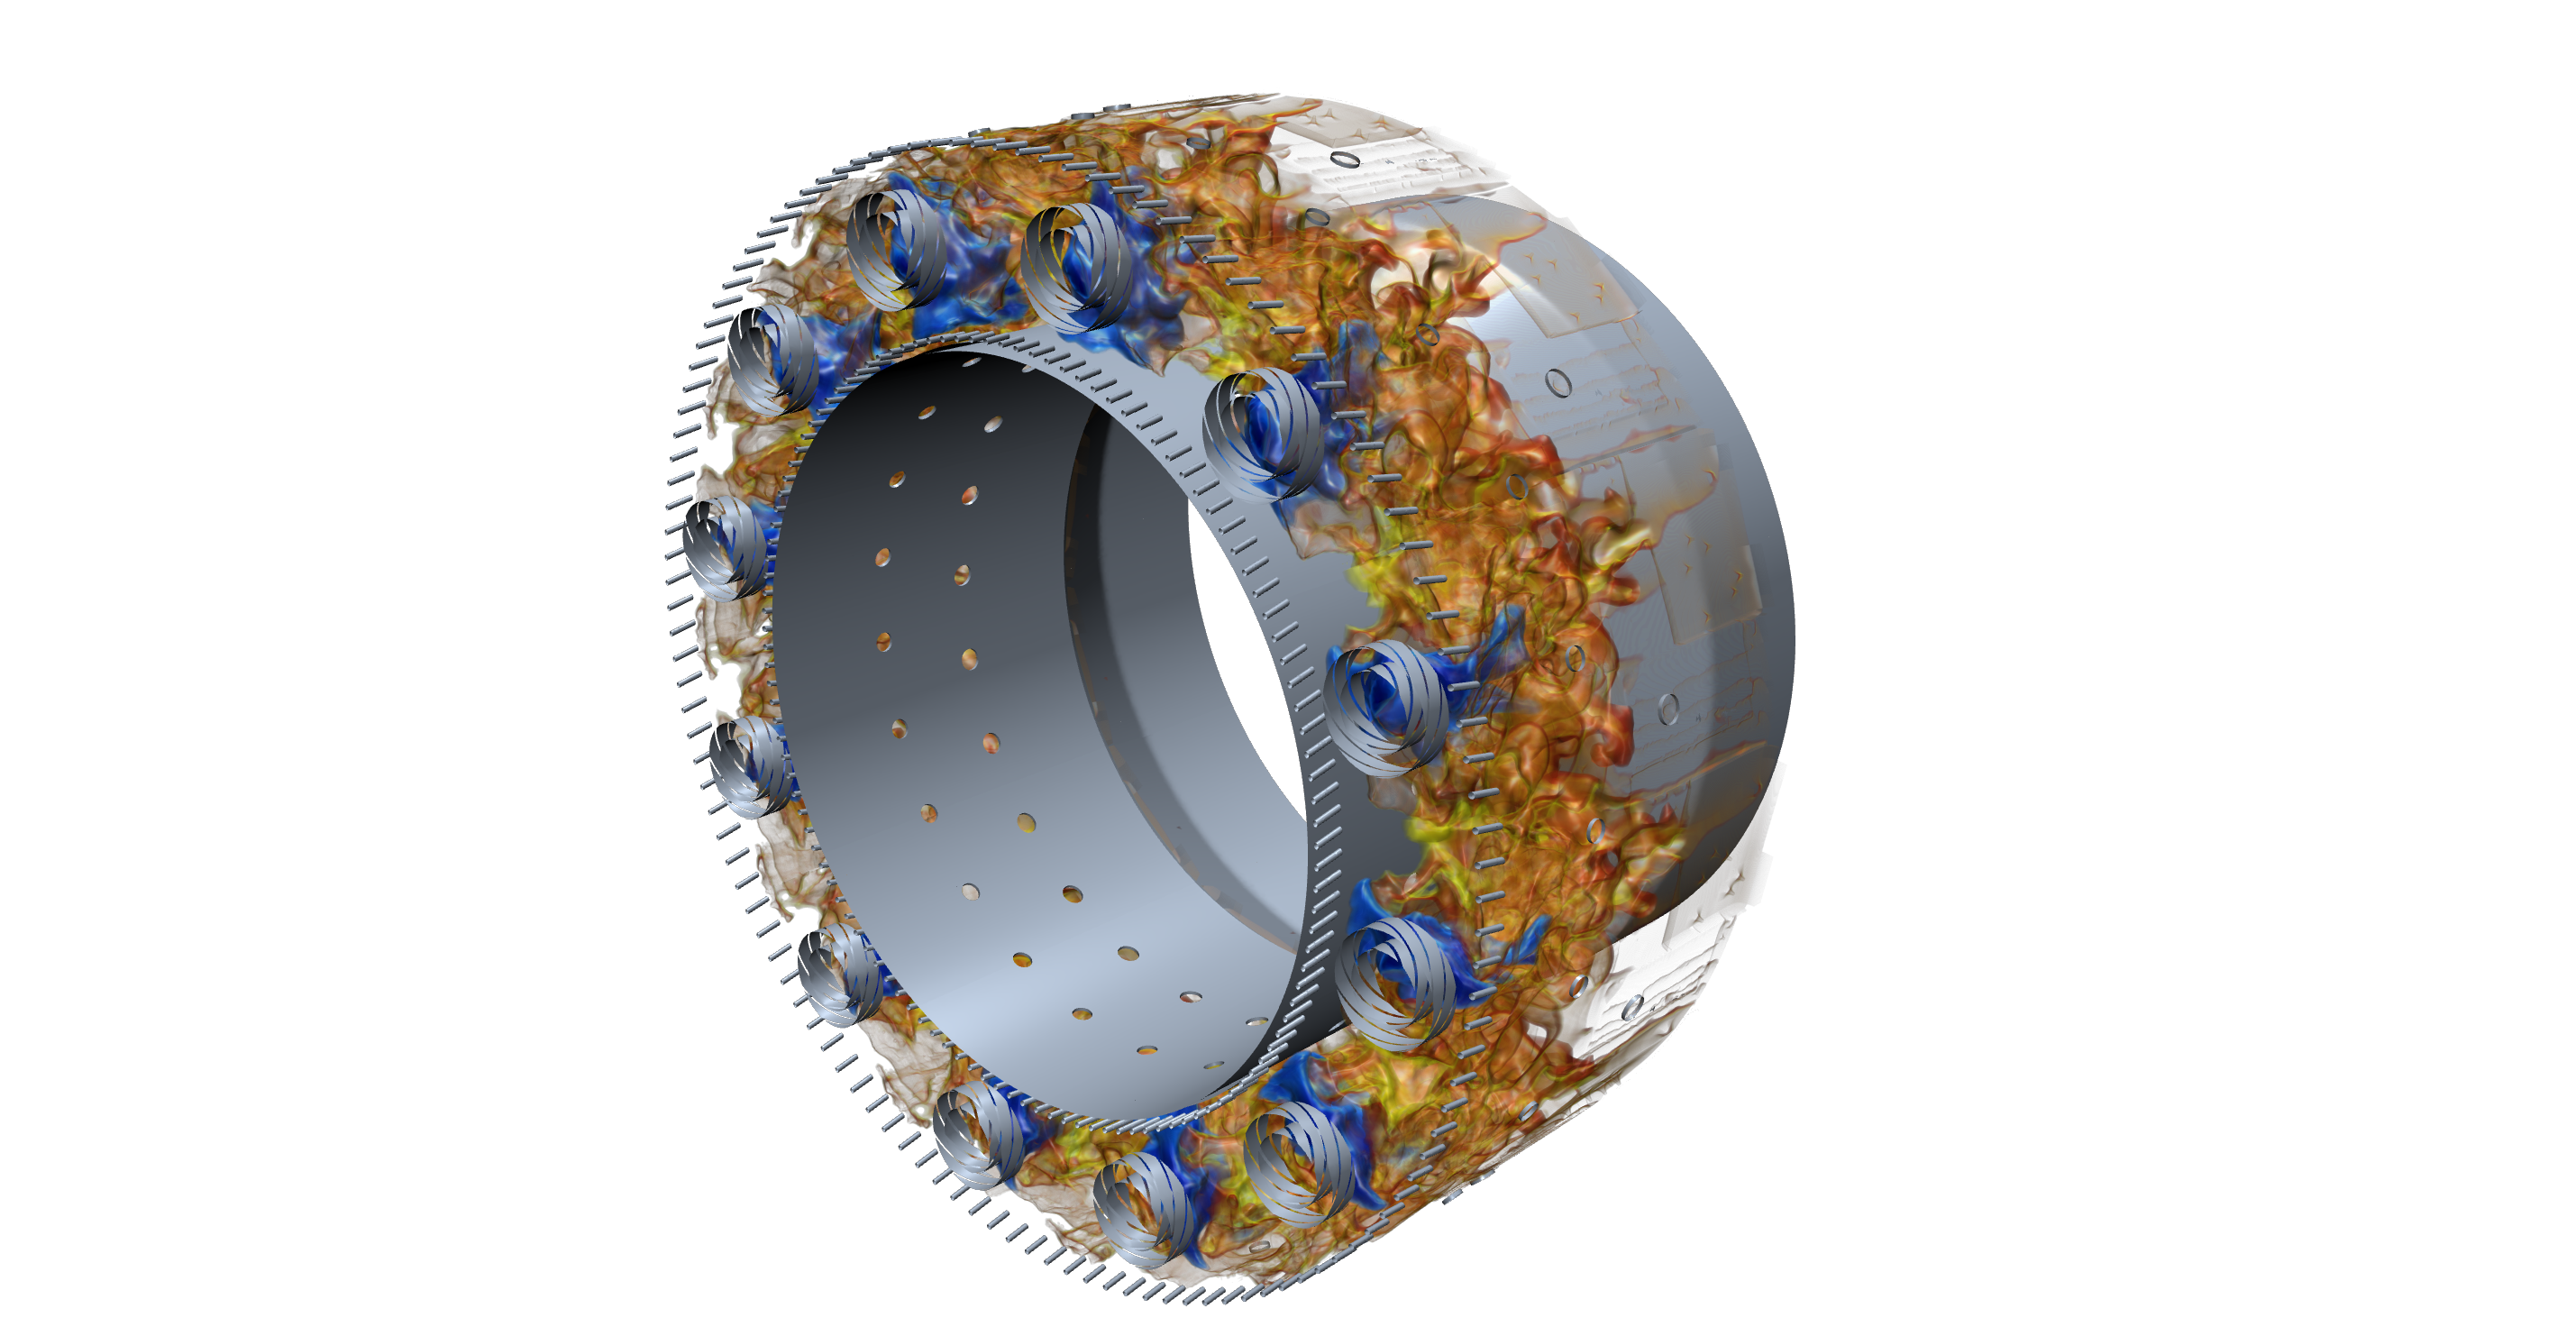 Simcenter STAR-CCM+ H2 combustion simulation linked with Simcenter Amesim system model of combined gas turbine and fuel cell.